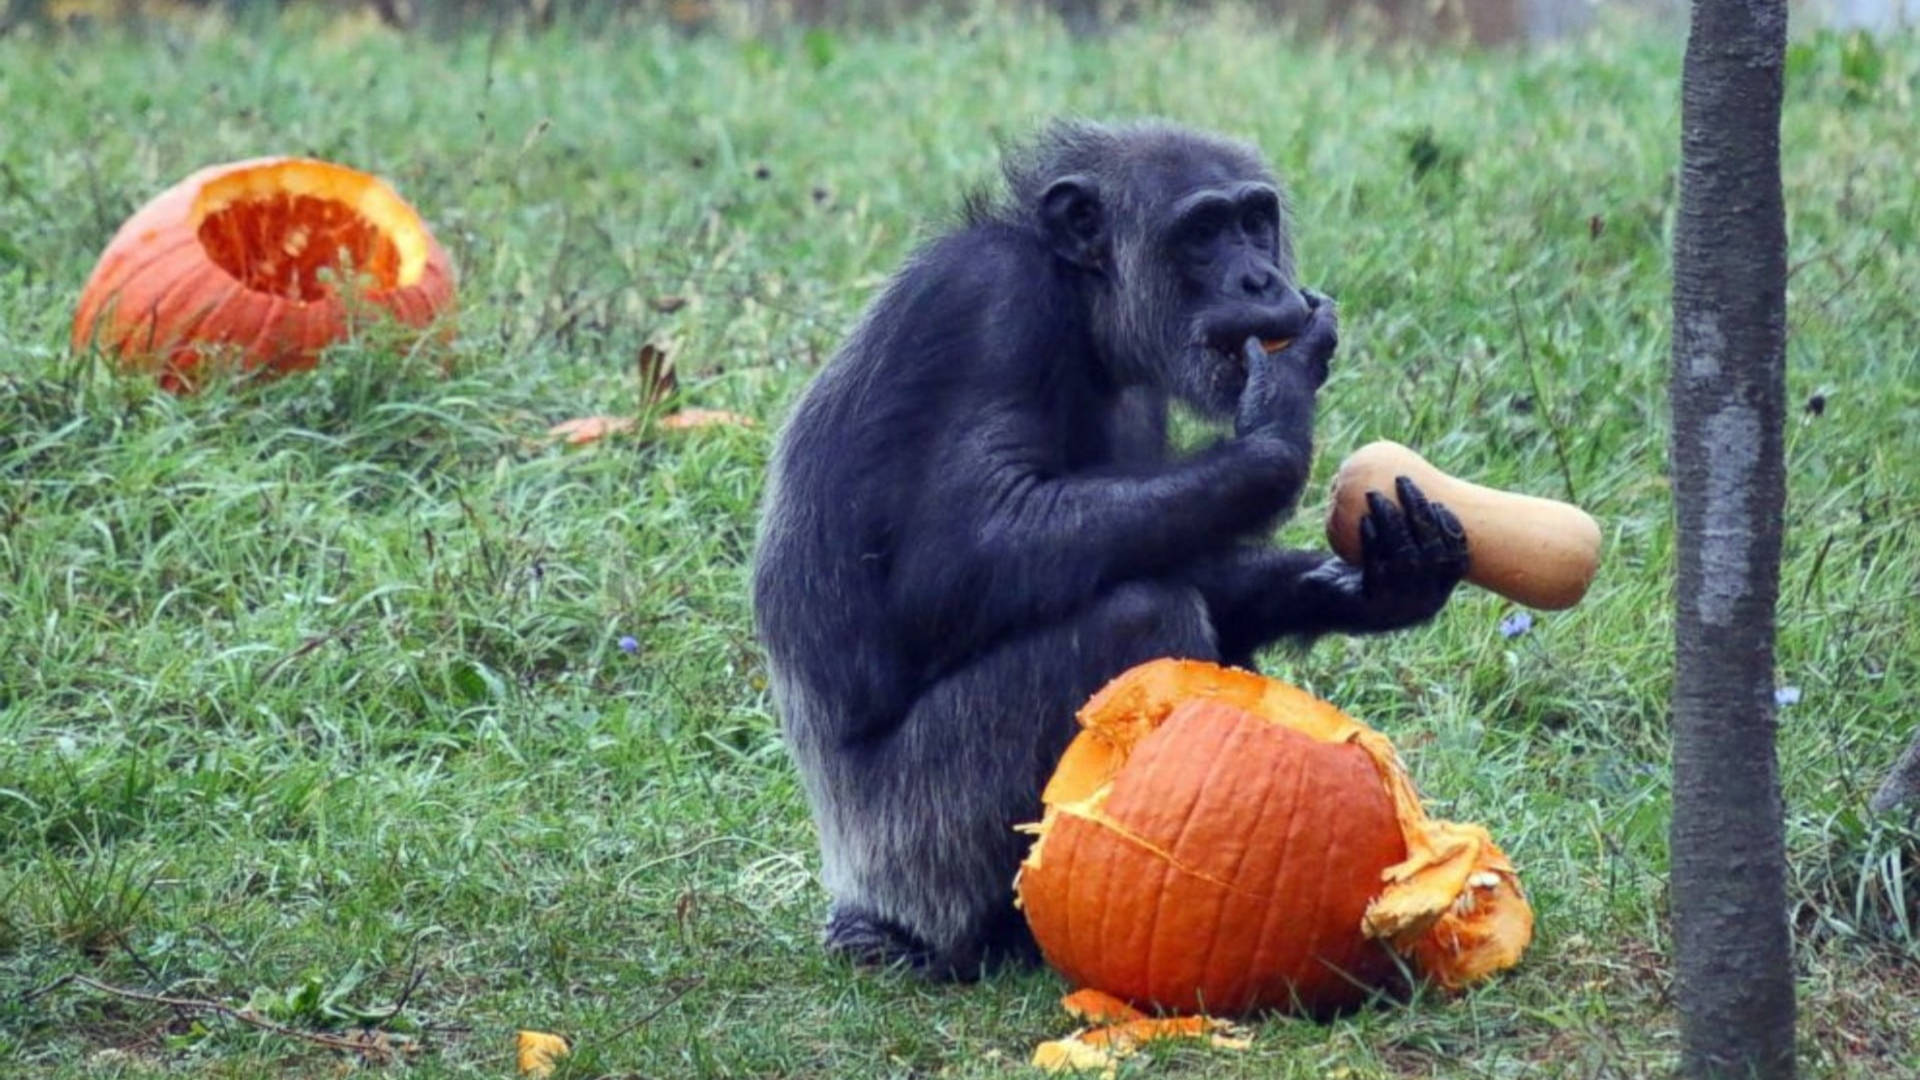 Chimpanzee With Pumpkins In Zoo